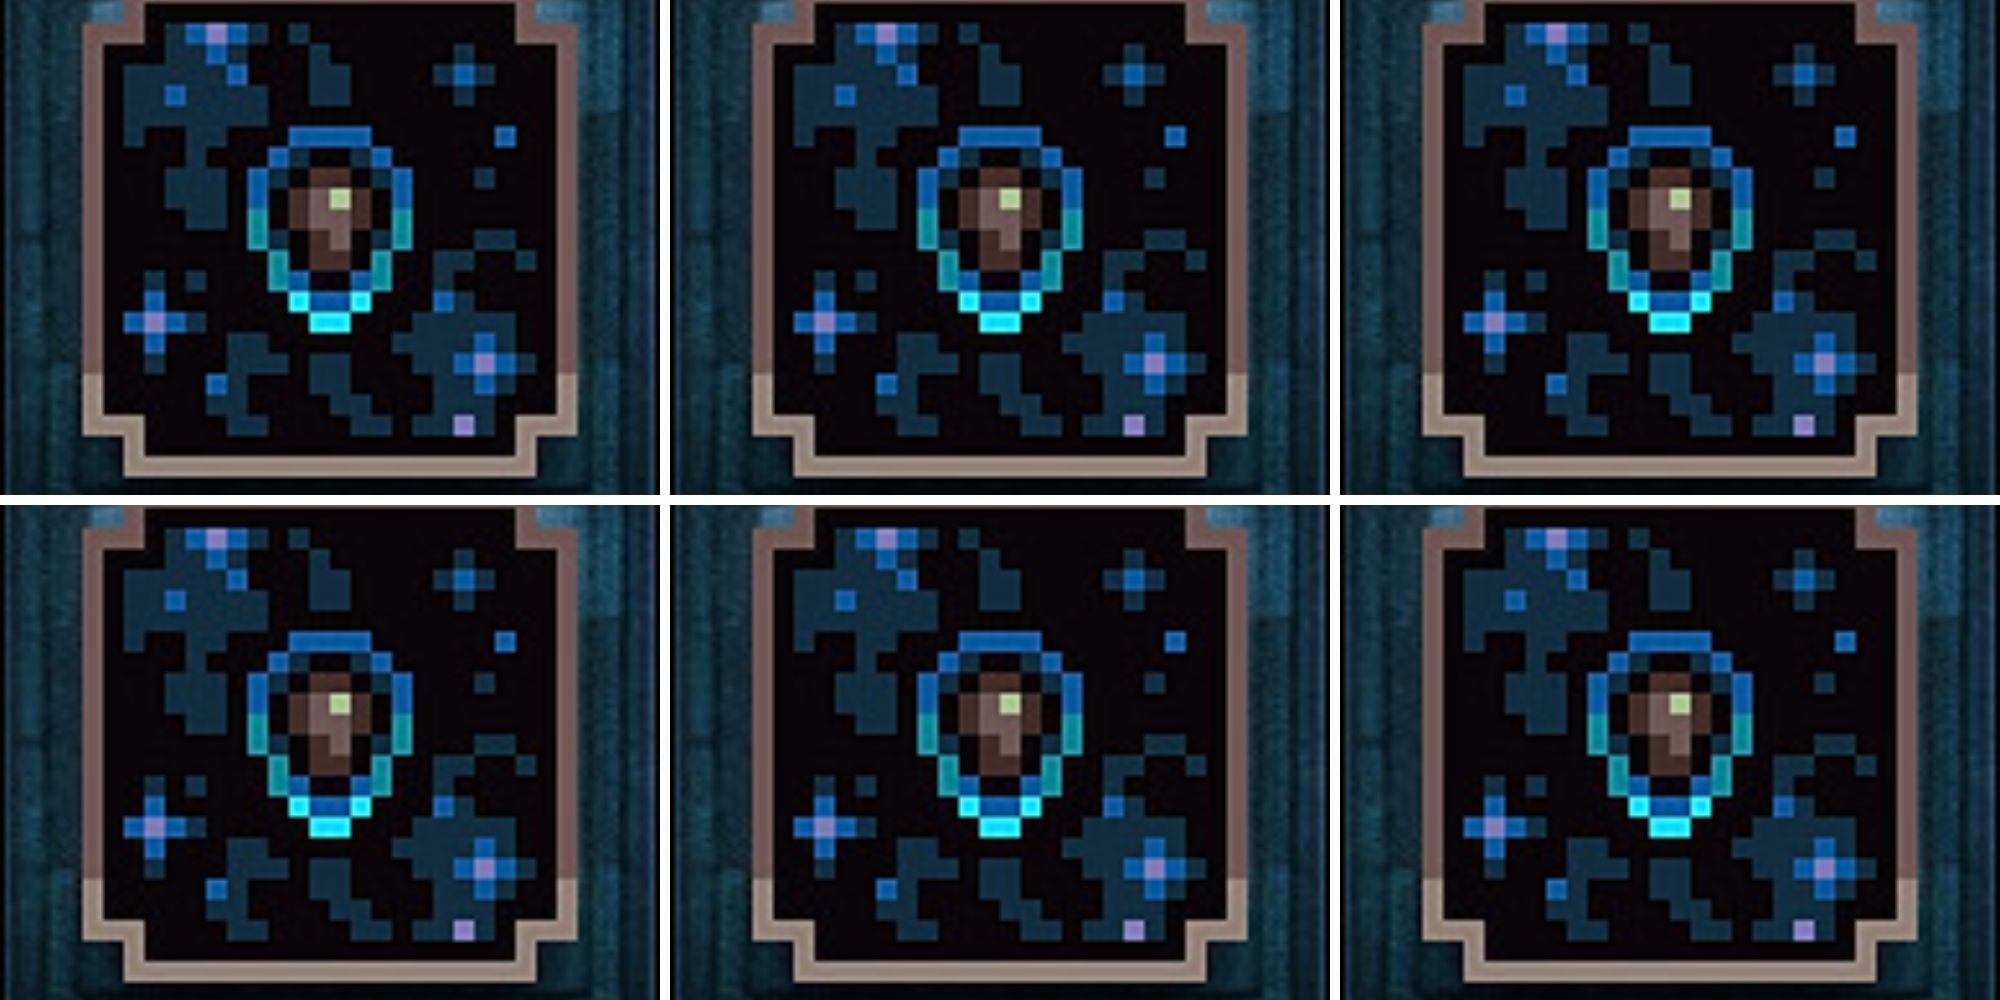 Repeating black and blue Rainy Day Fund achievement pattern.